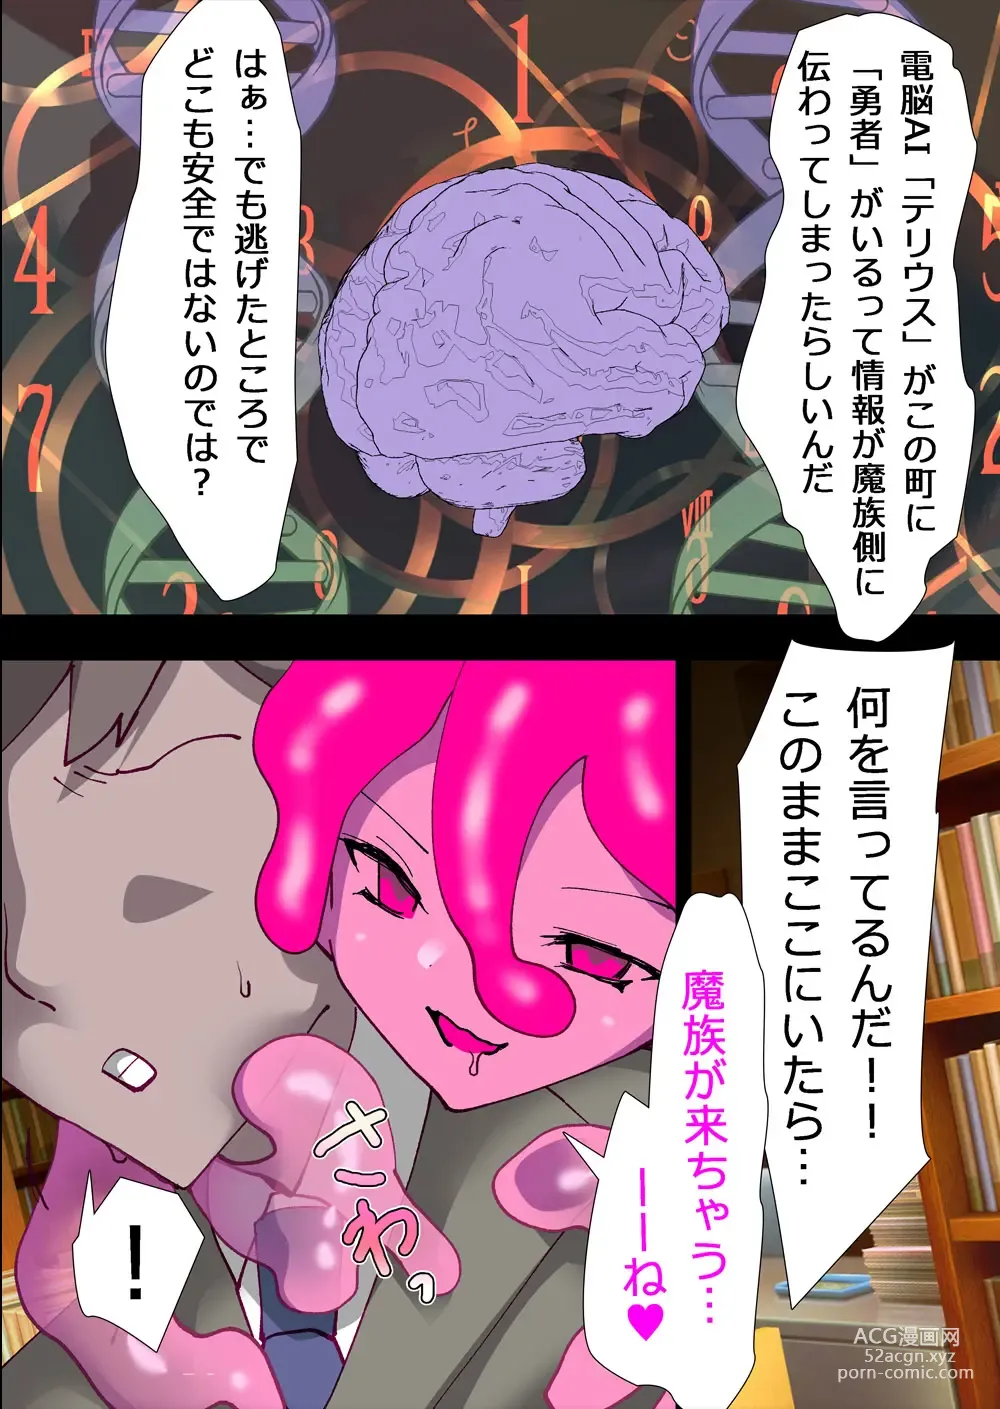 Page 5 of doujinshi You have been selected by a cyber AI!